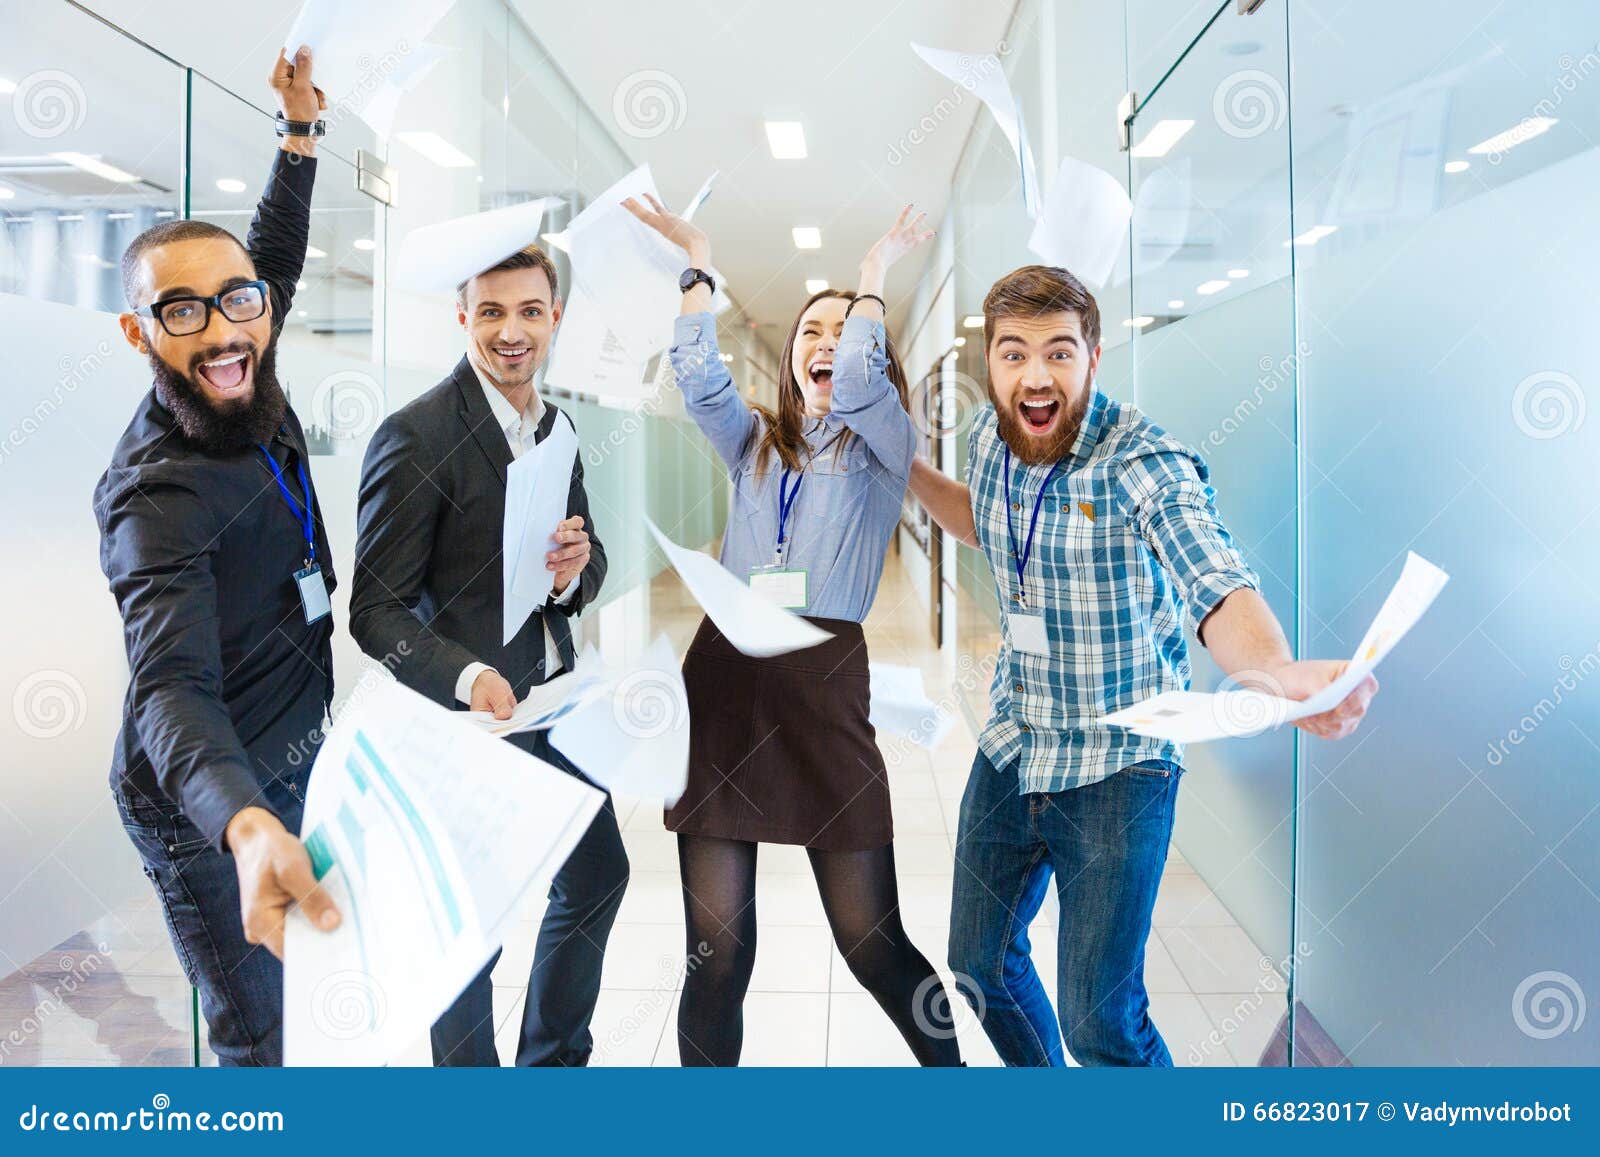 group of joyful excited business people having fun in office